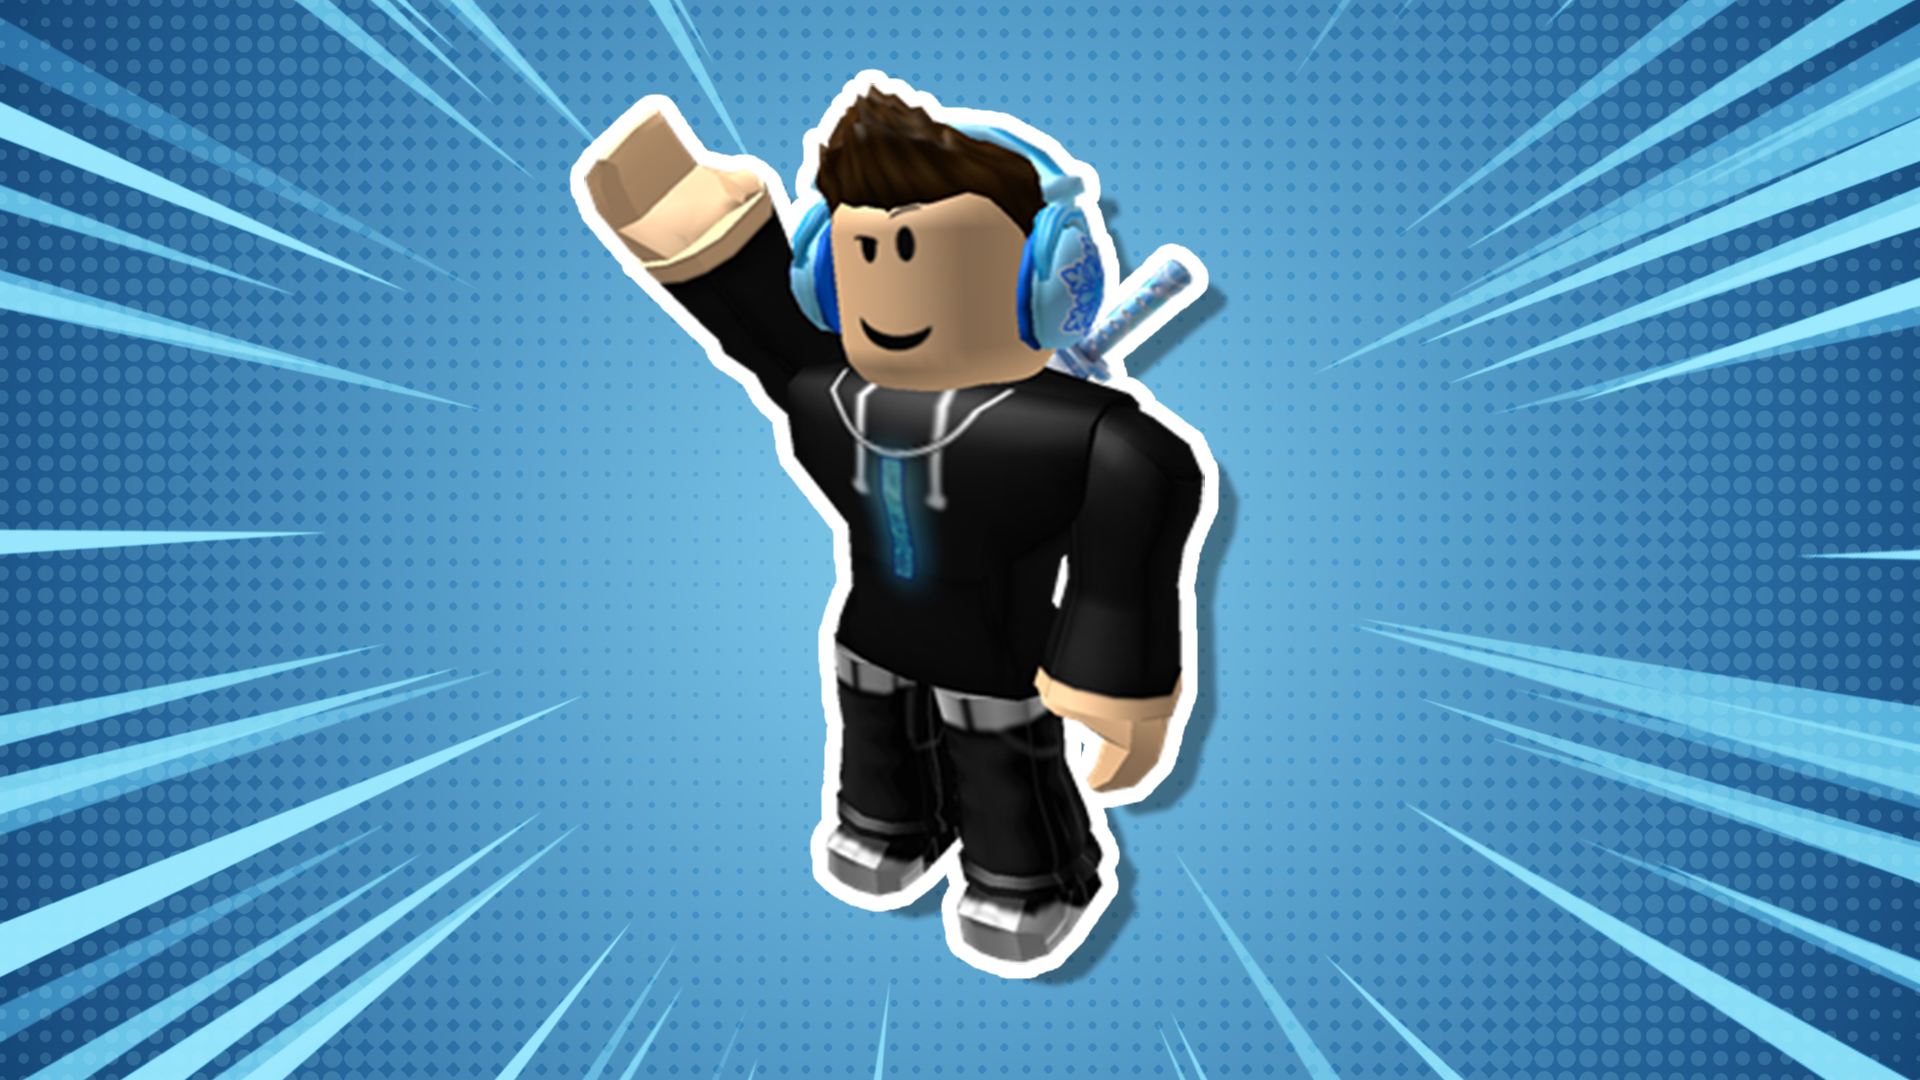 A Roblox character